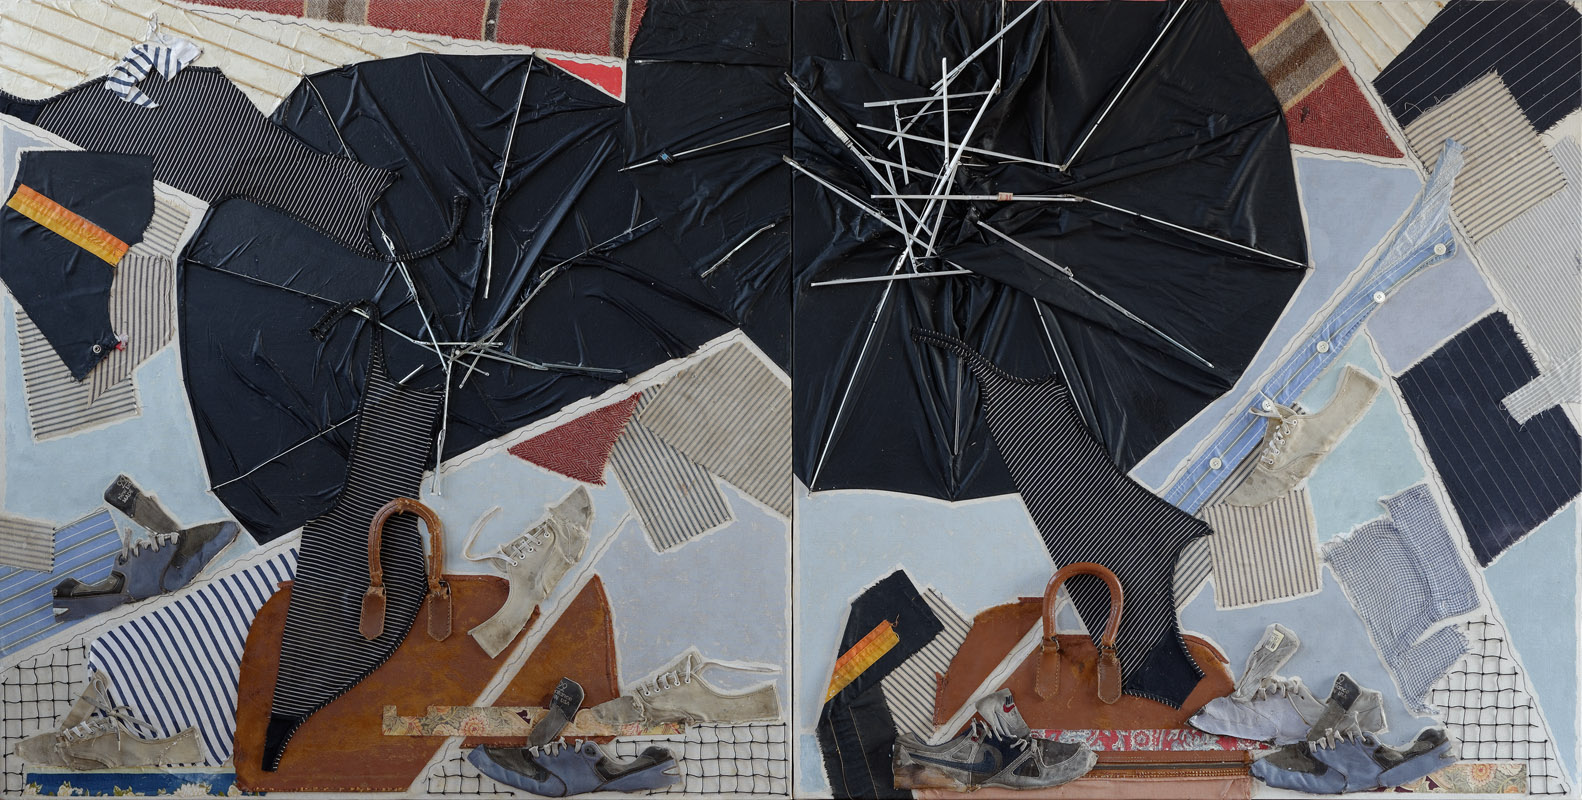   #74, Composition with Umbrellas  2 panels each 48 h x 48 inches, 2011 